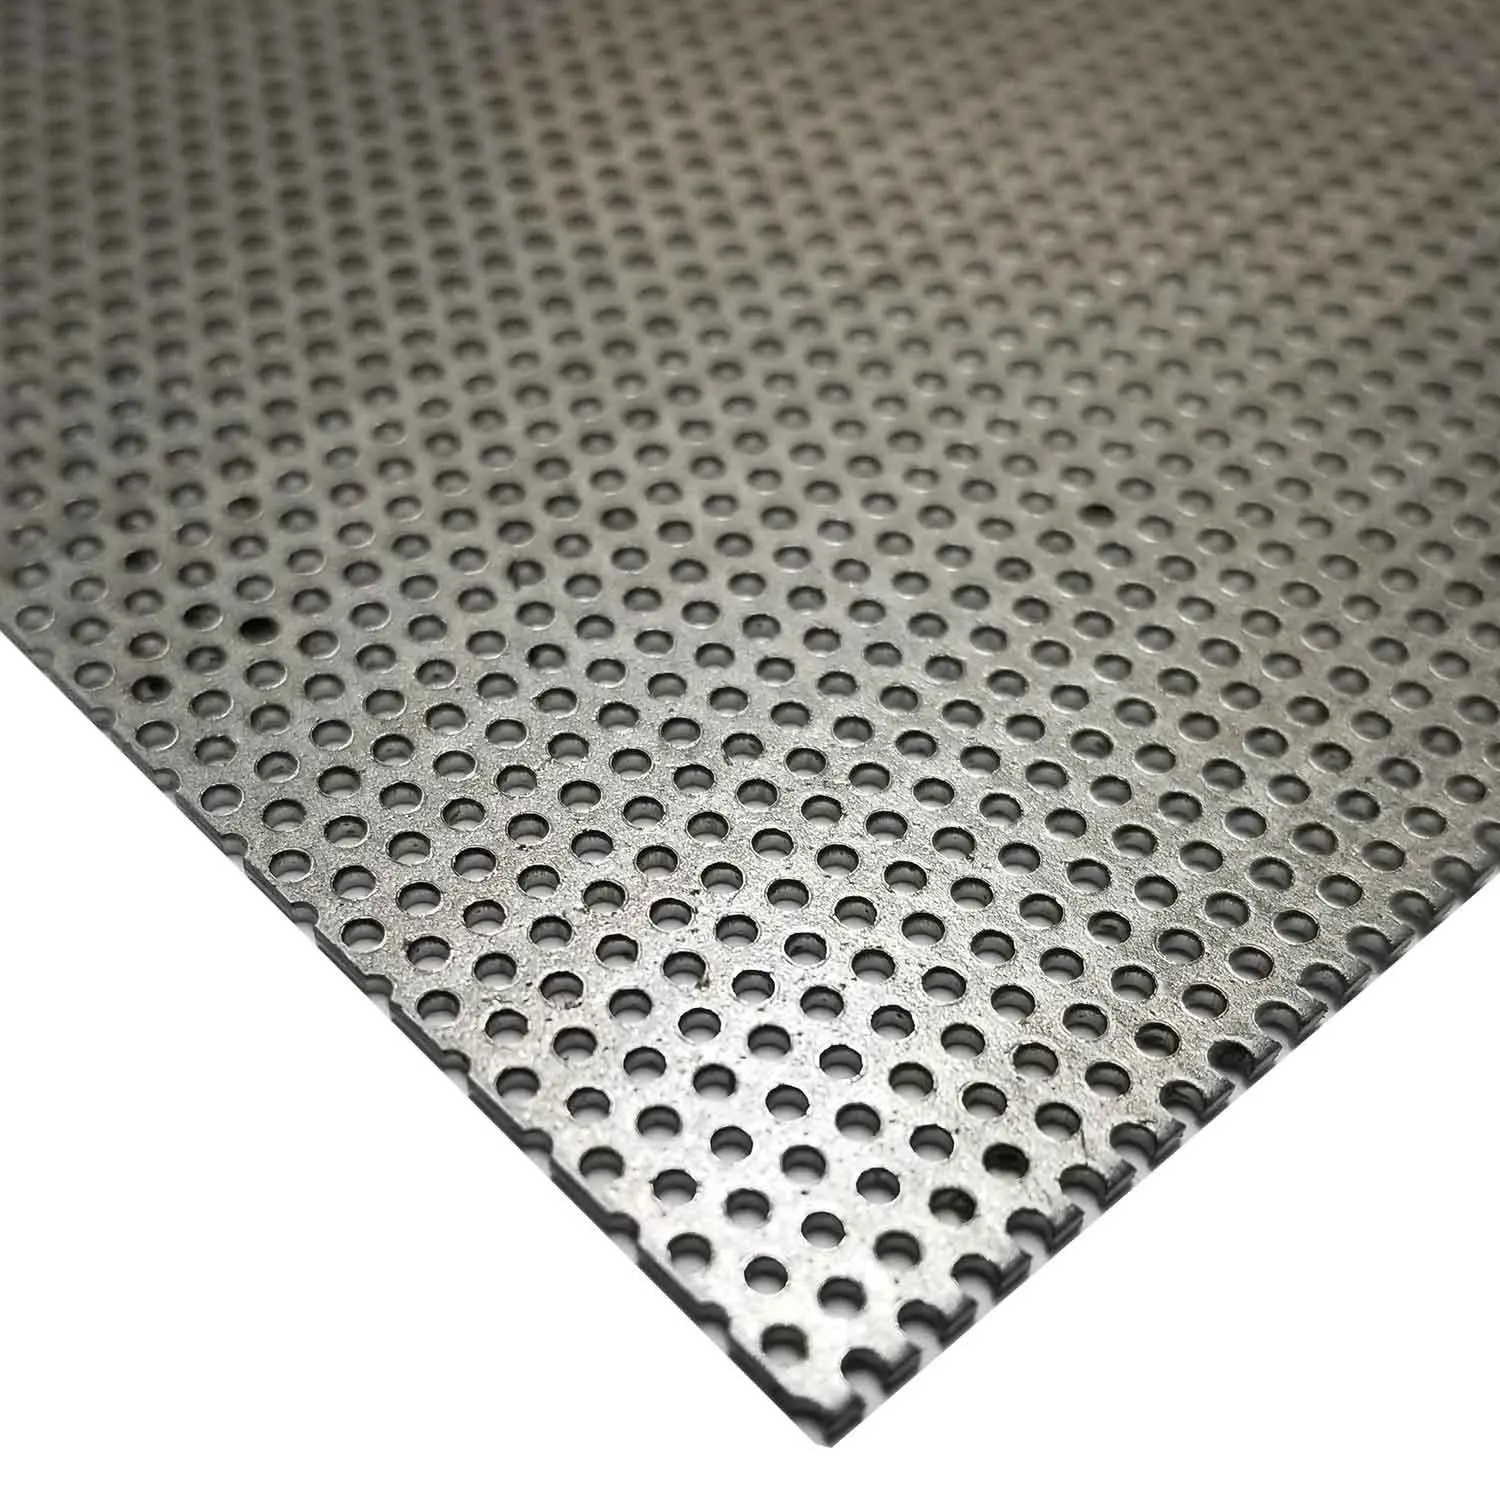 Buy Online Metal Supply Steel Perforated Sheet, Thickness 0.036 (20 ga.), Width 24", Length